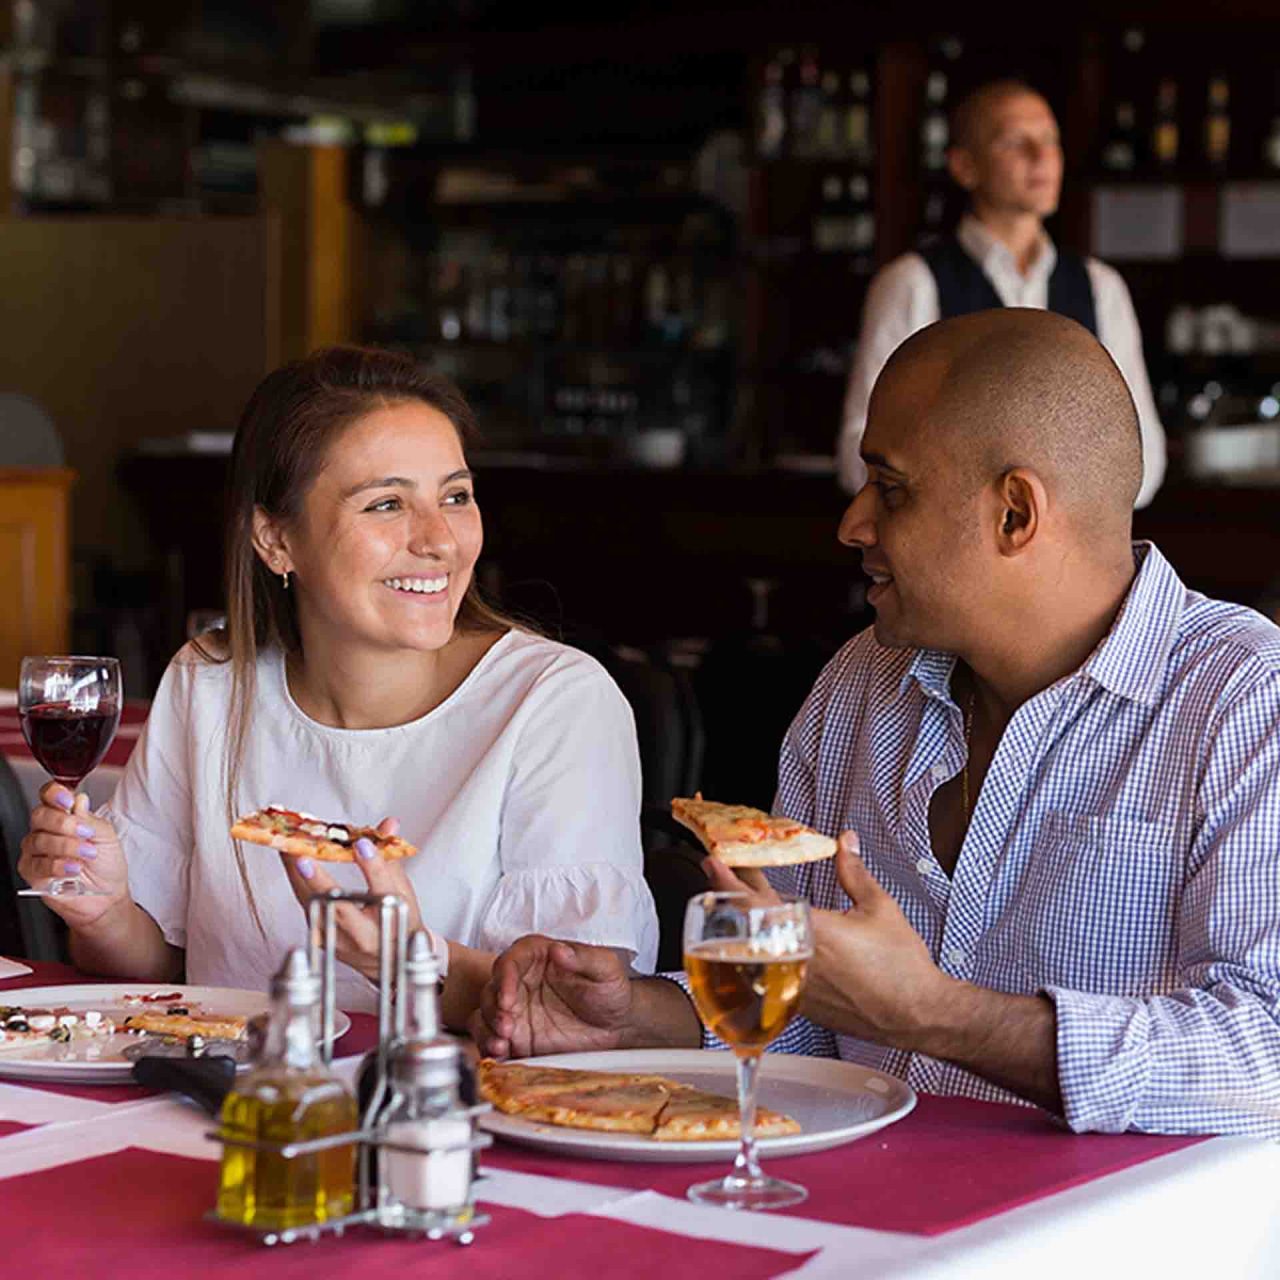 Man and woman eating pizza in restaurant